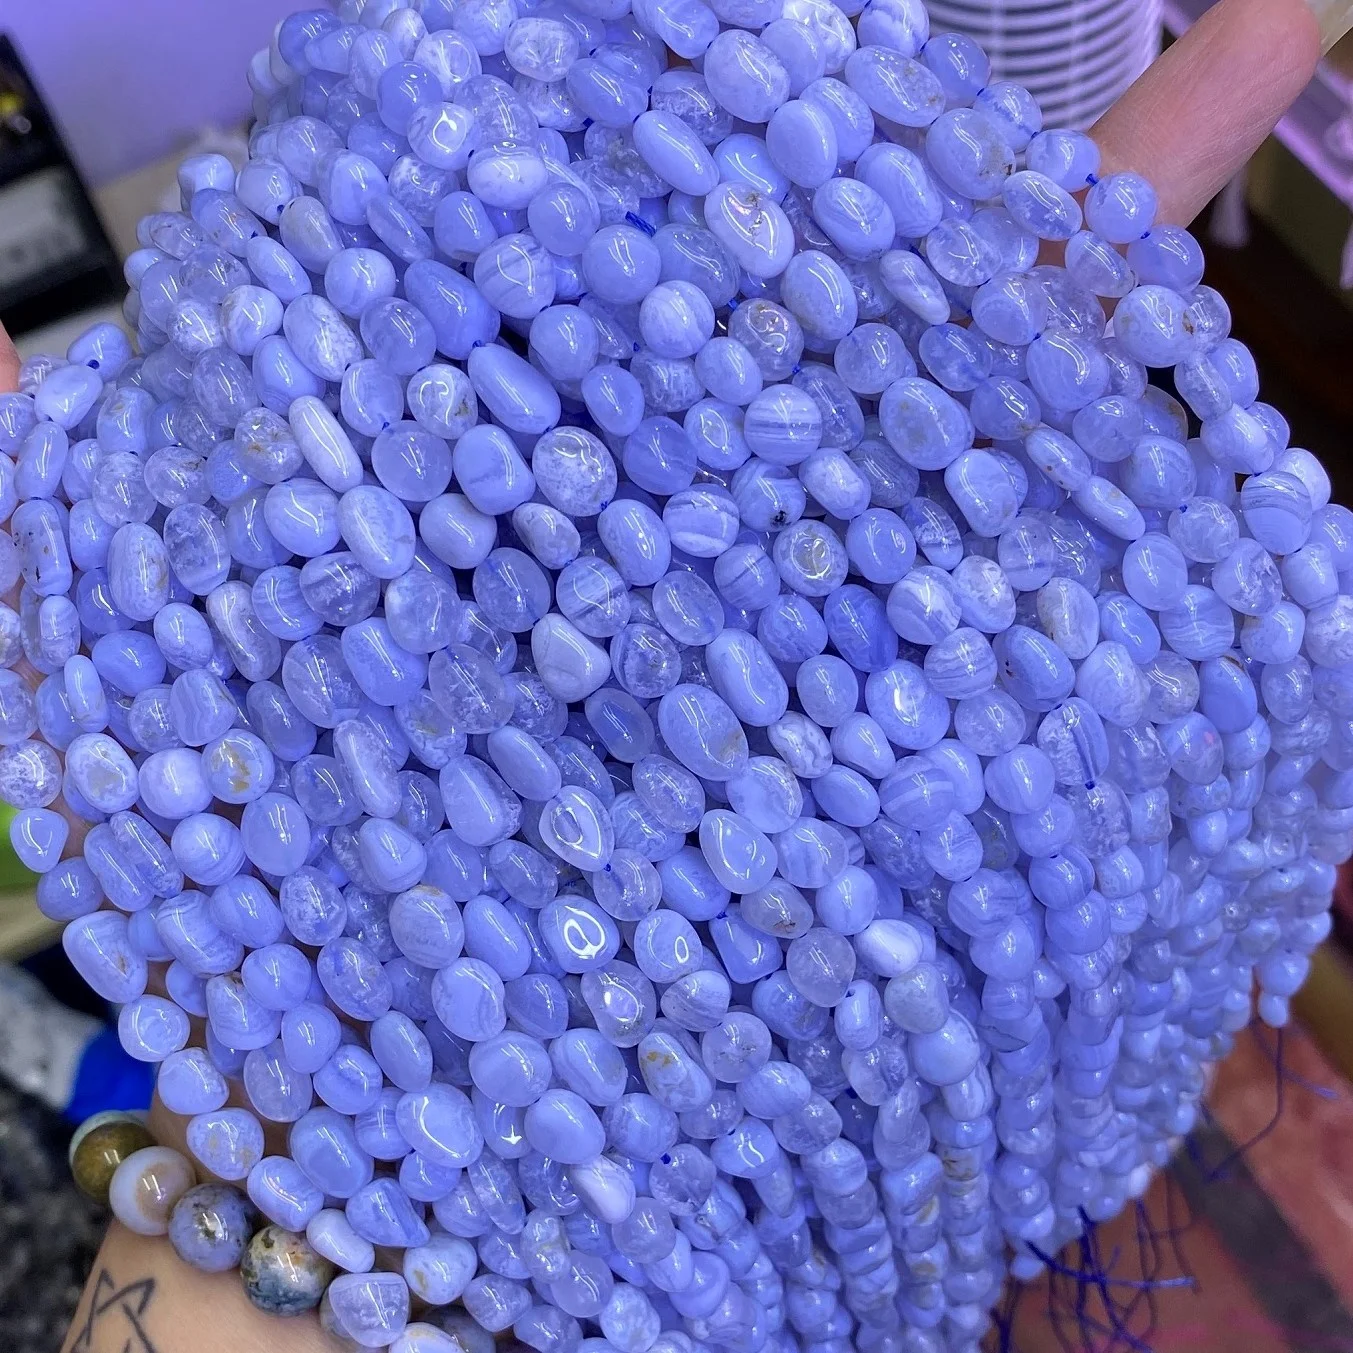 

Natural 8-10mm Blue Lace Agate Irregular Shape Beads Gravel Pebble Gemstone Beads Healing Energy for Jewelry Making 15" Strand, 100% natural color